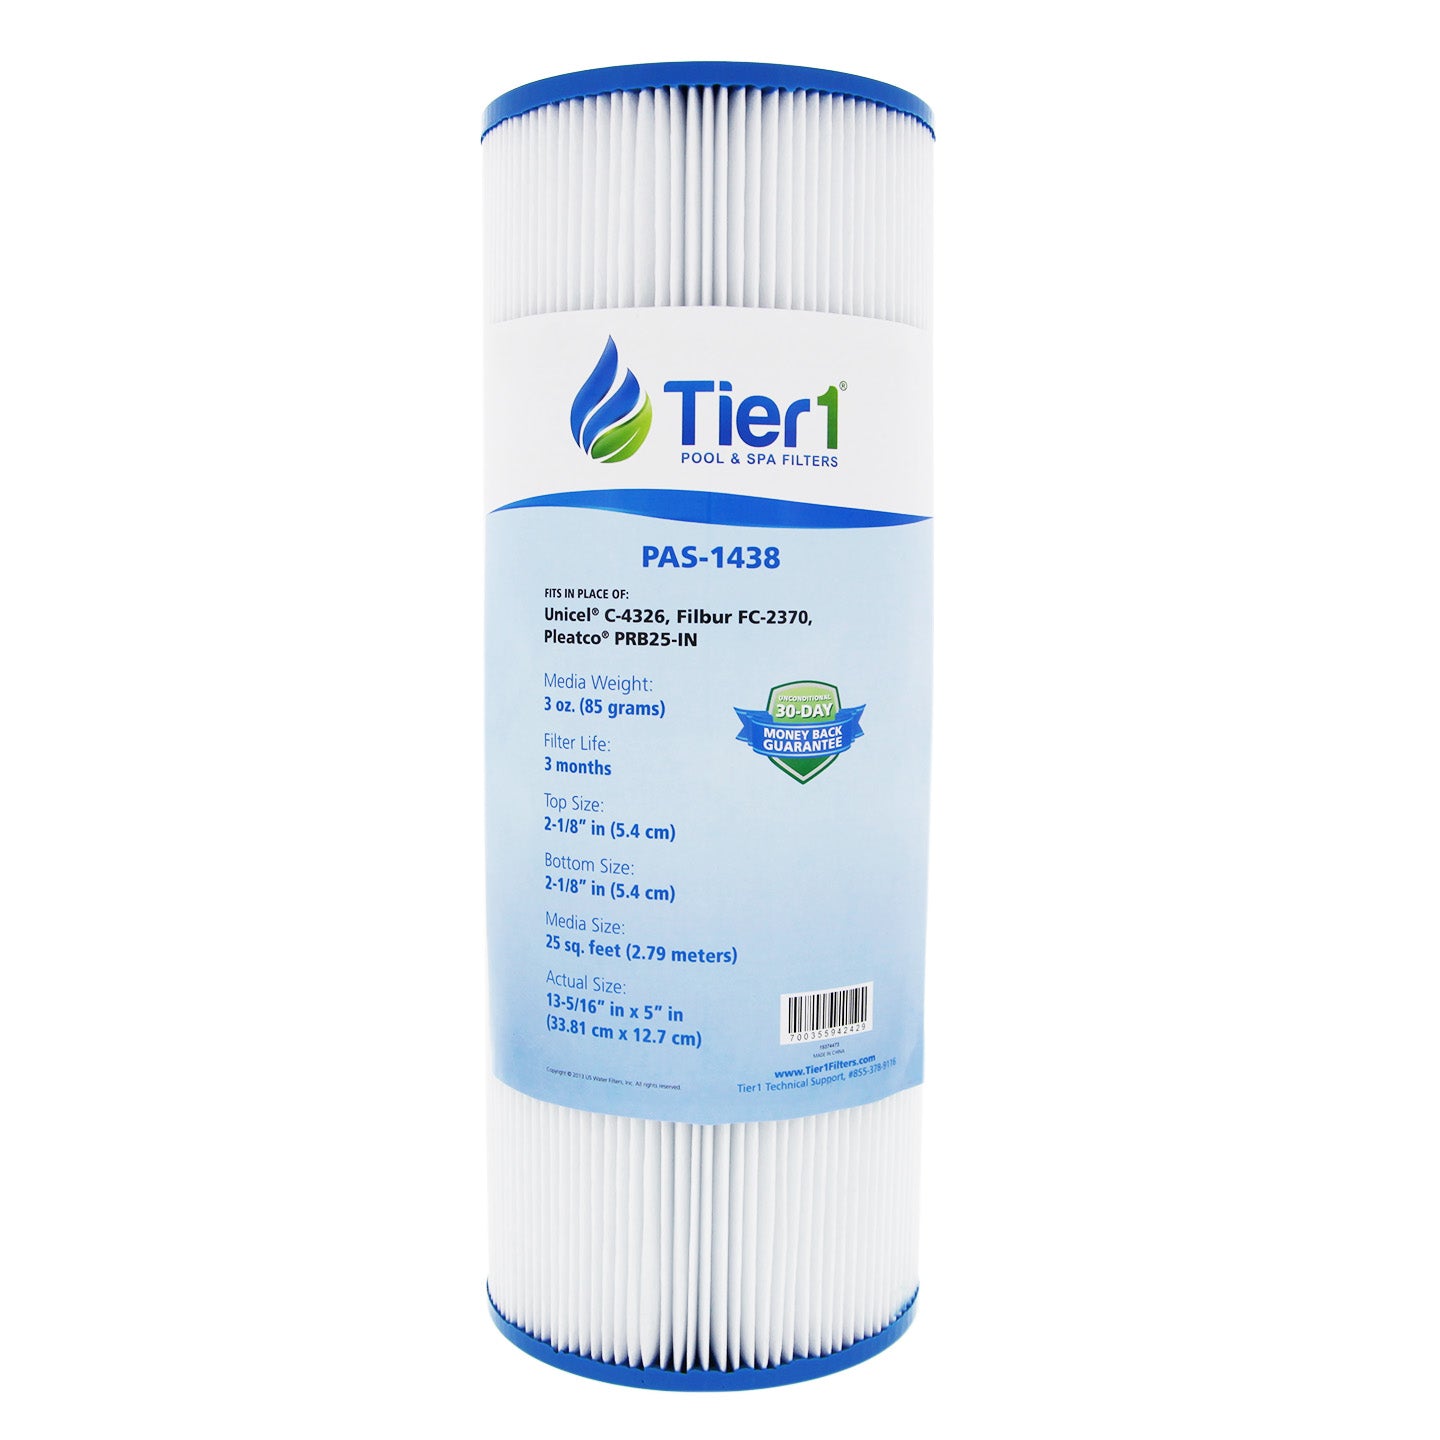 Tier1 Brand Replacement Pool and Spa Filter for 17-2327, 100586, 33521, 25392, 303909, M-4326, 817-2500 & R173429